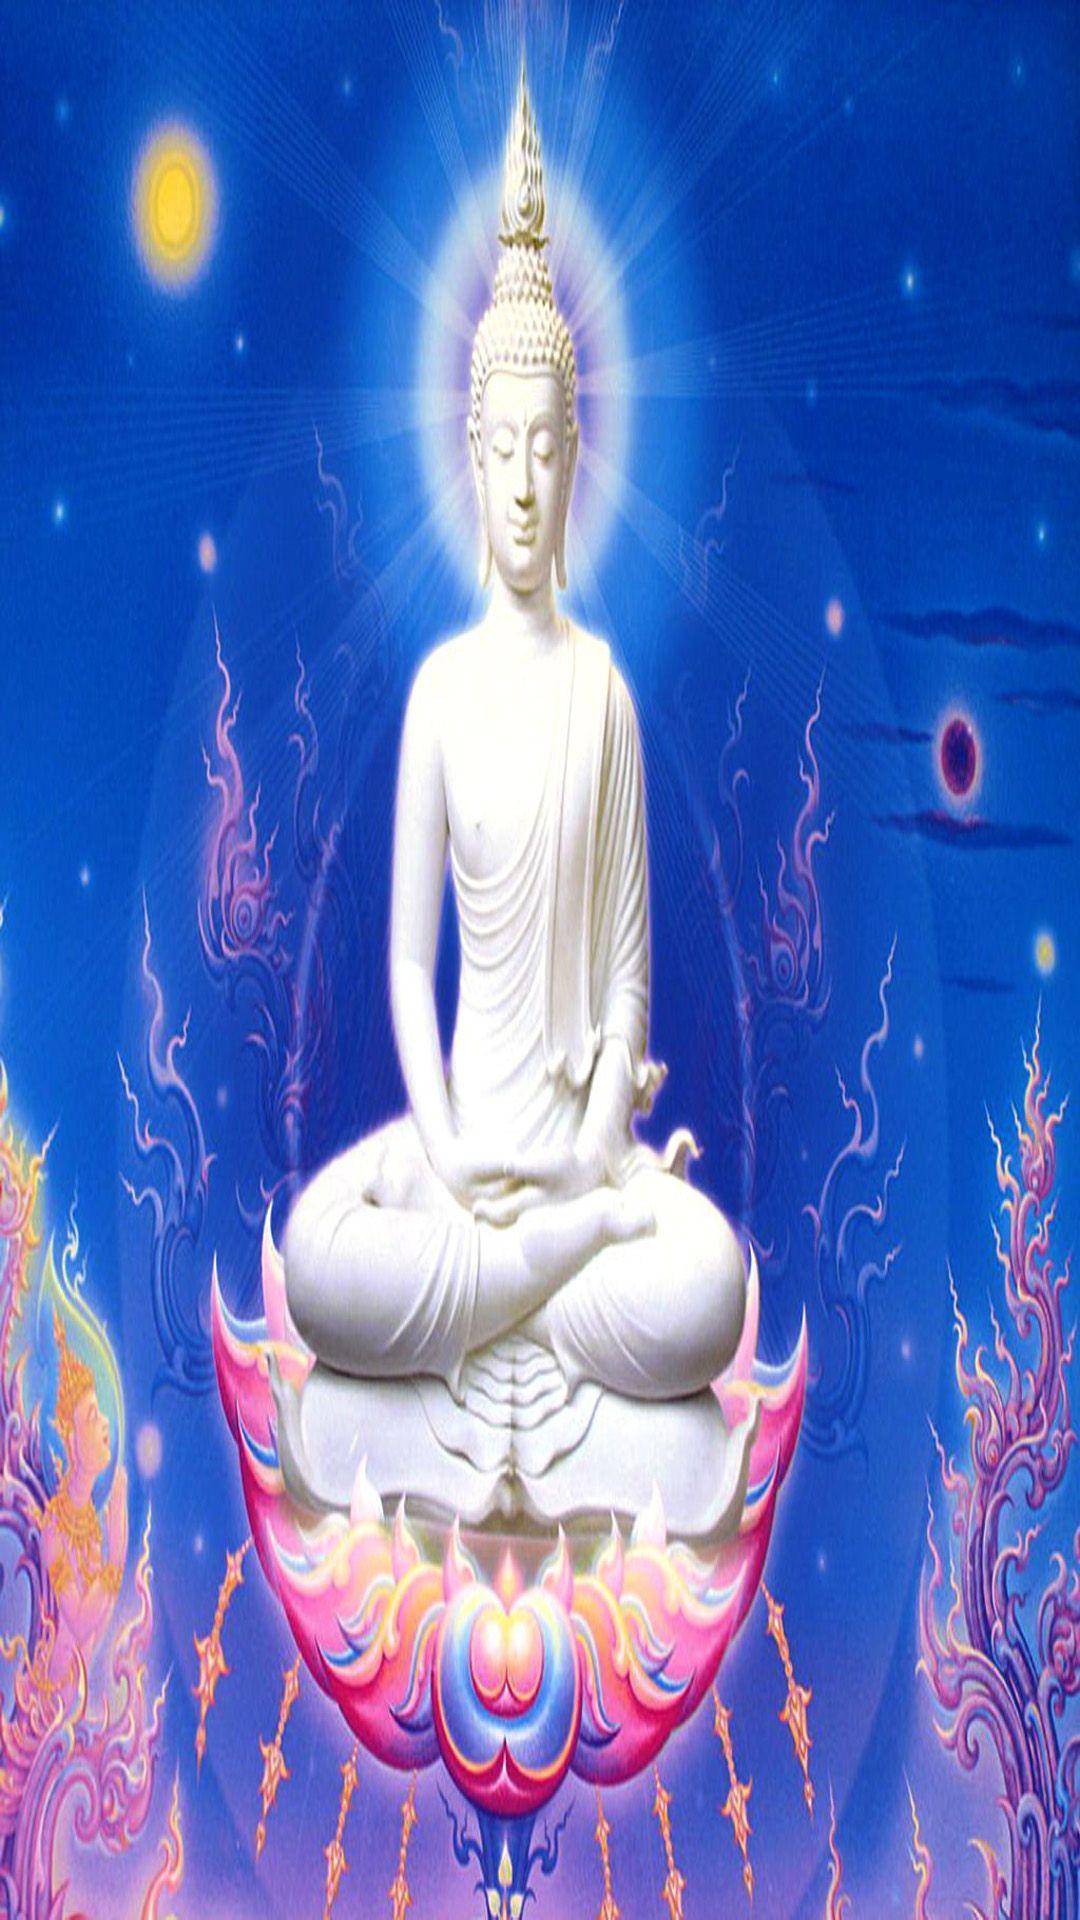 White lord buddha with blue background iphone HD wallpaper. iPhone